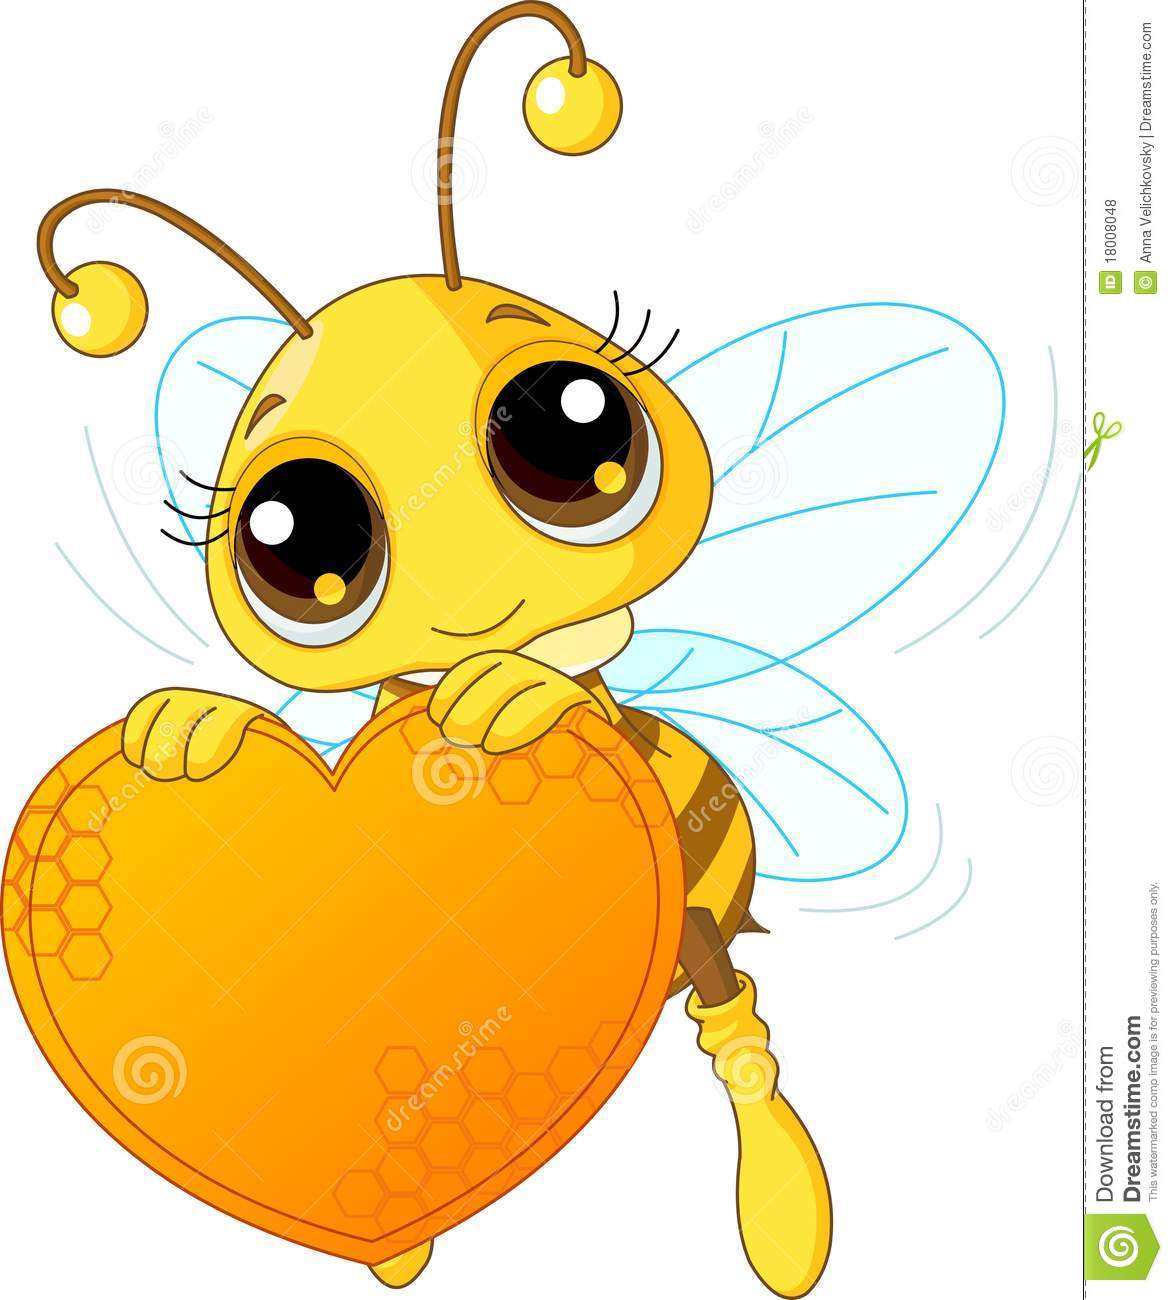 Cute Bee Holding A Sweet Heart Royalty Free Stock Photos   Image    